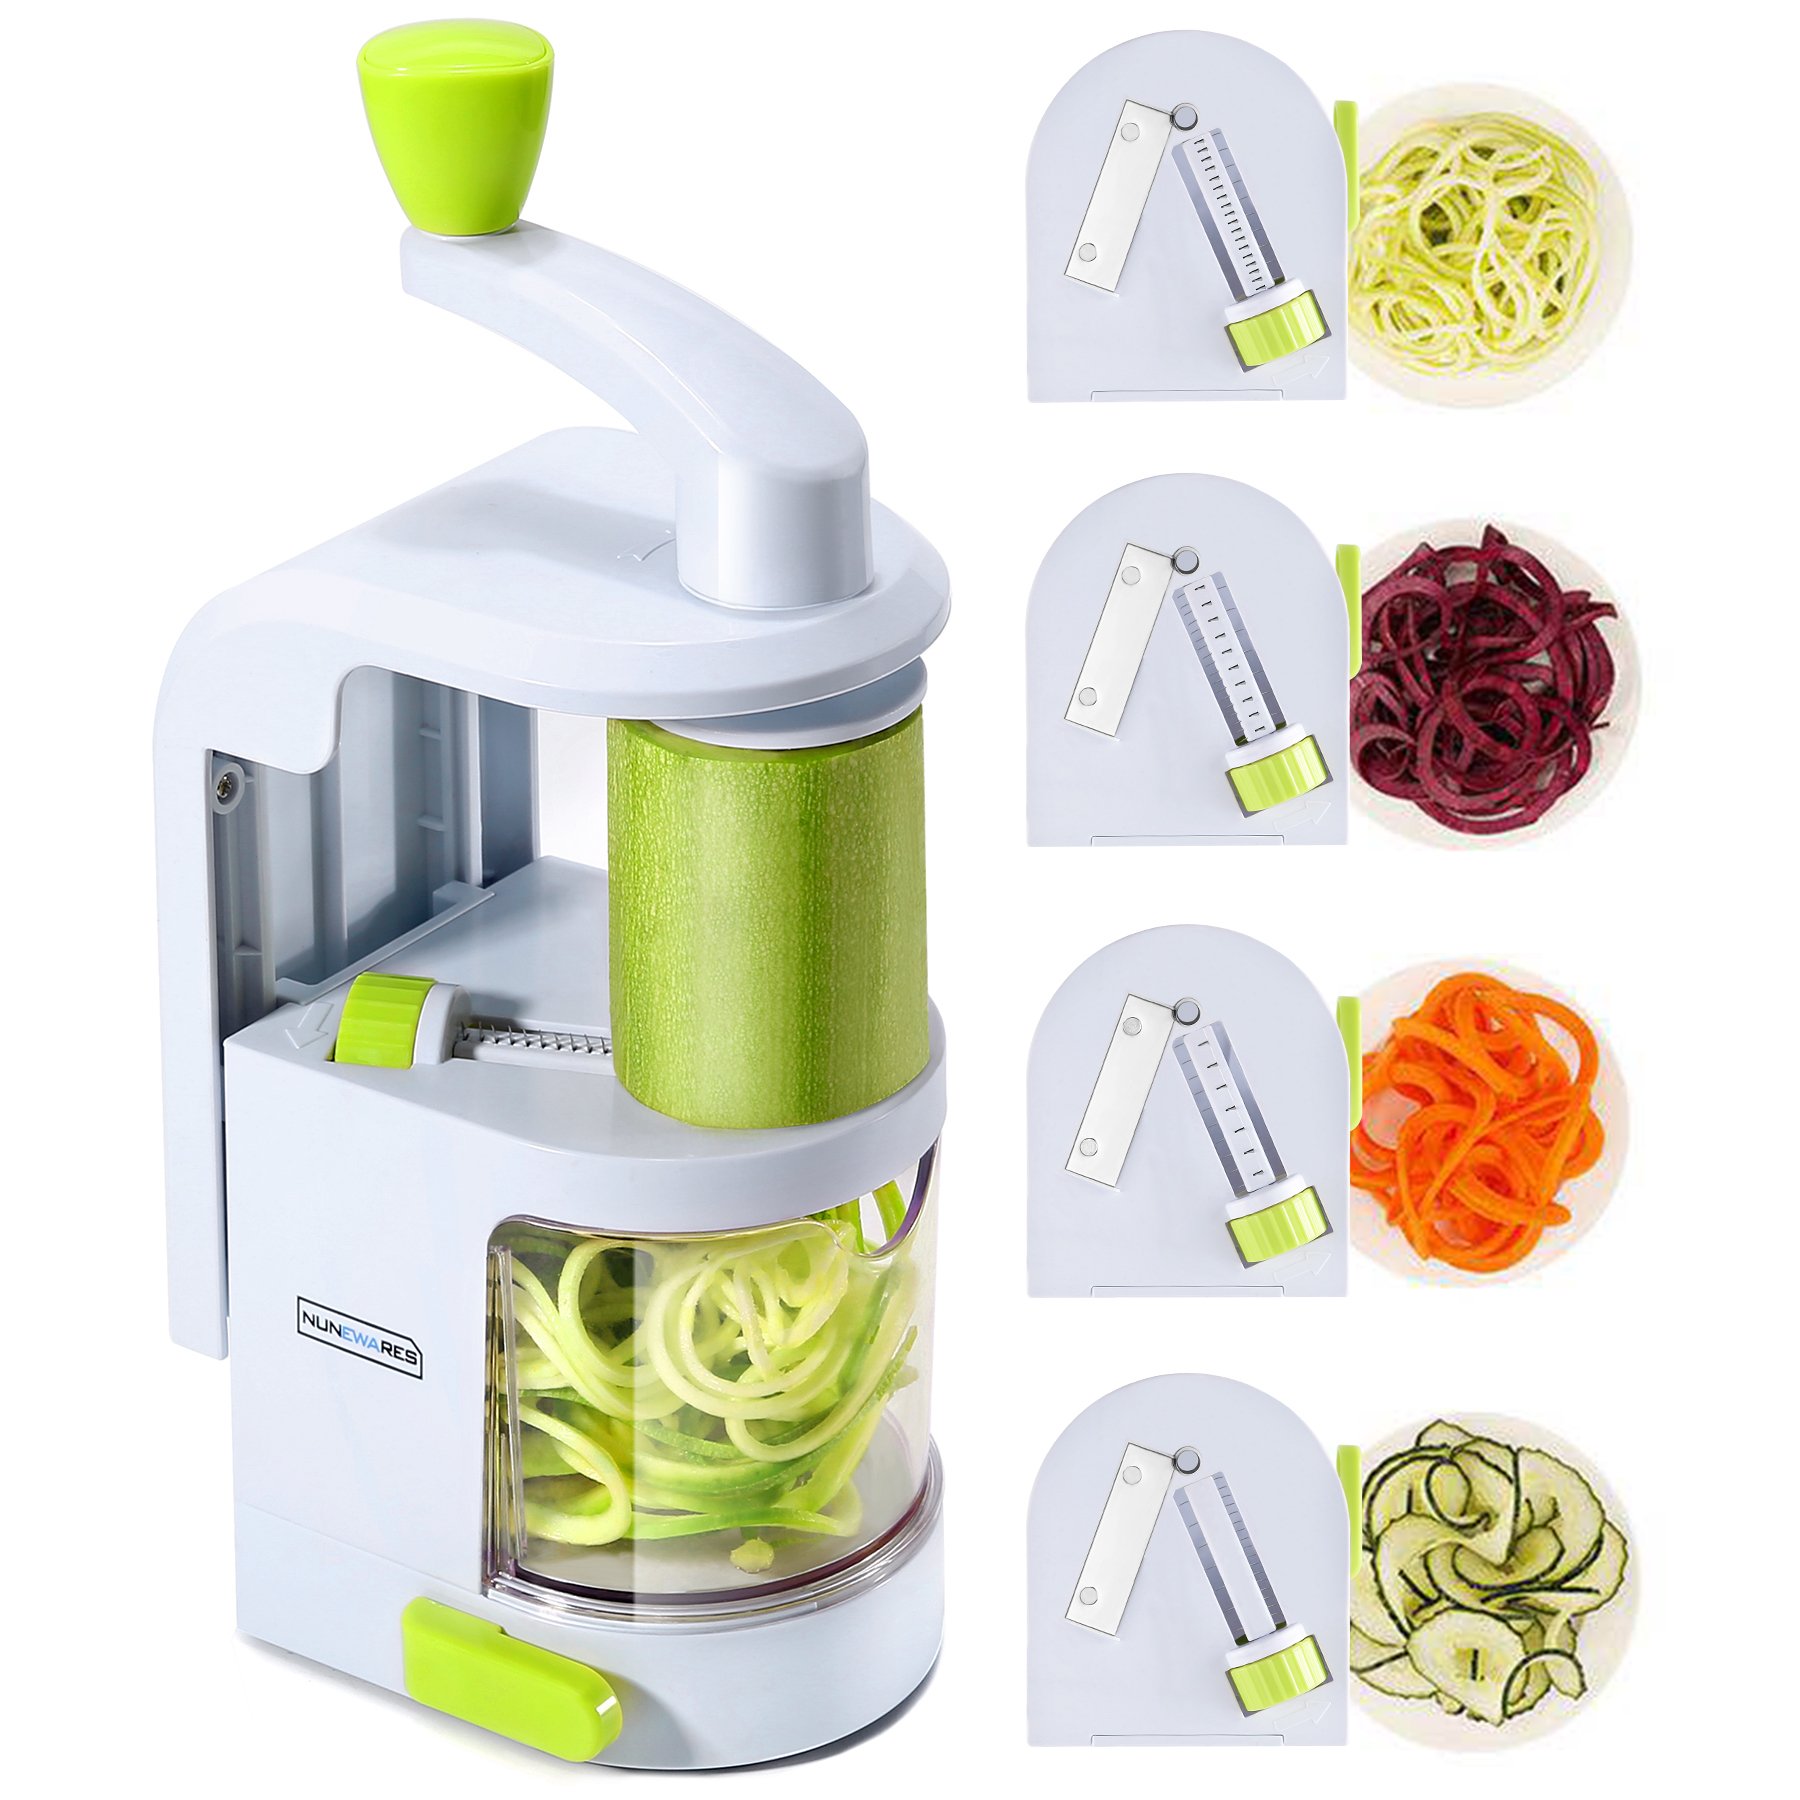 white and green spiralizer with attachments and vegetables - zucchini, carrots, etc.